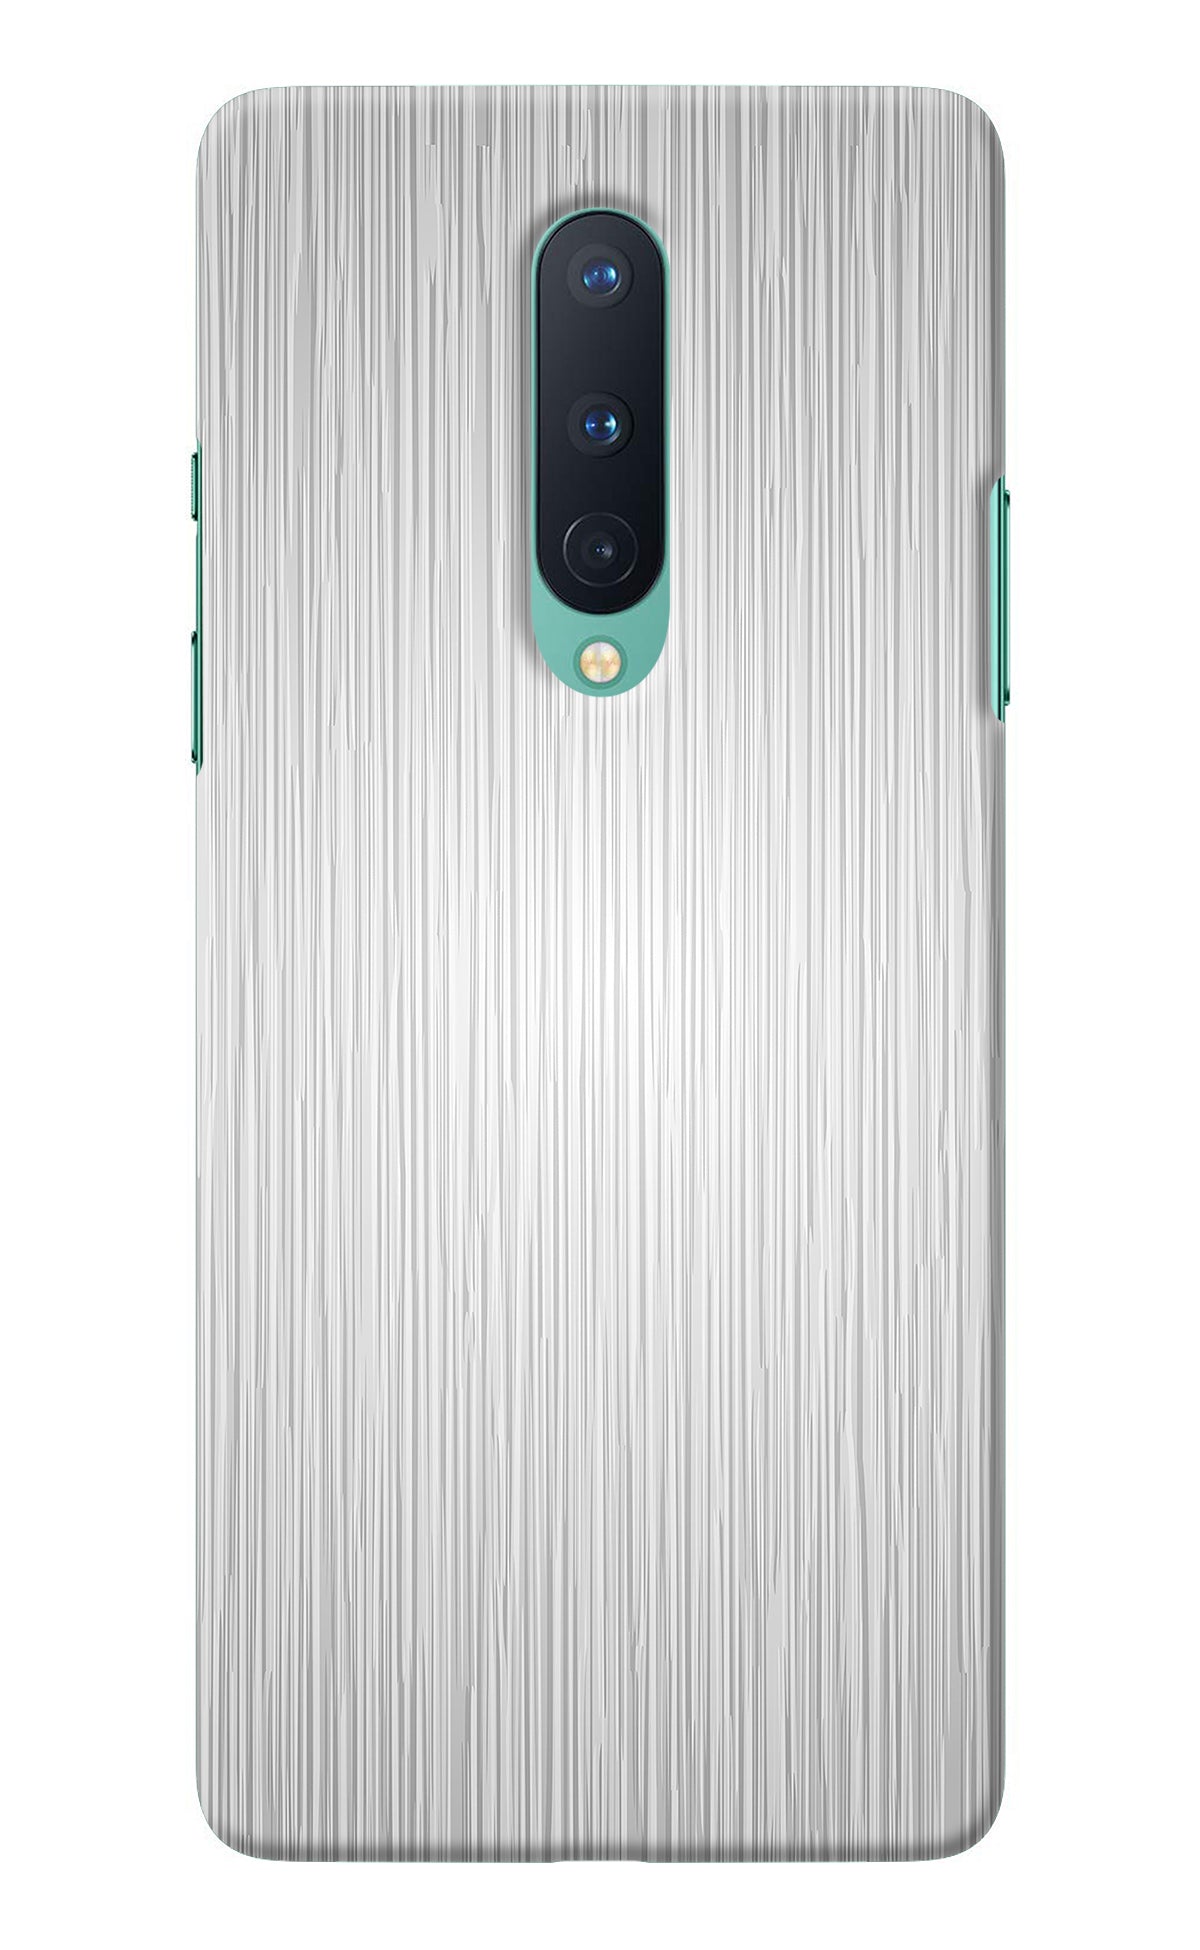 Wooden Grey Texture Oneplus 8 Back Cover